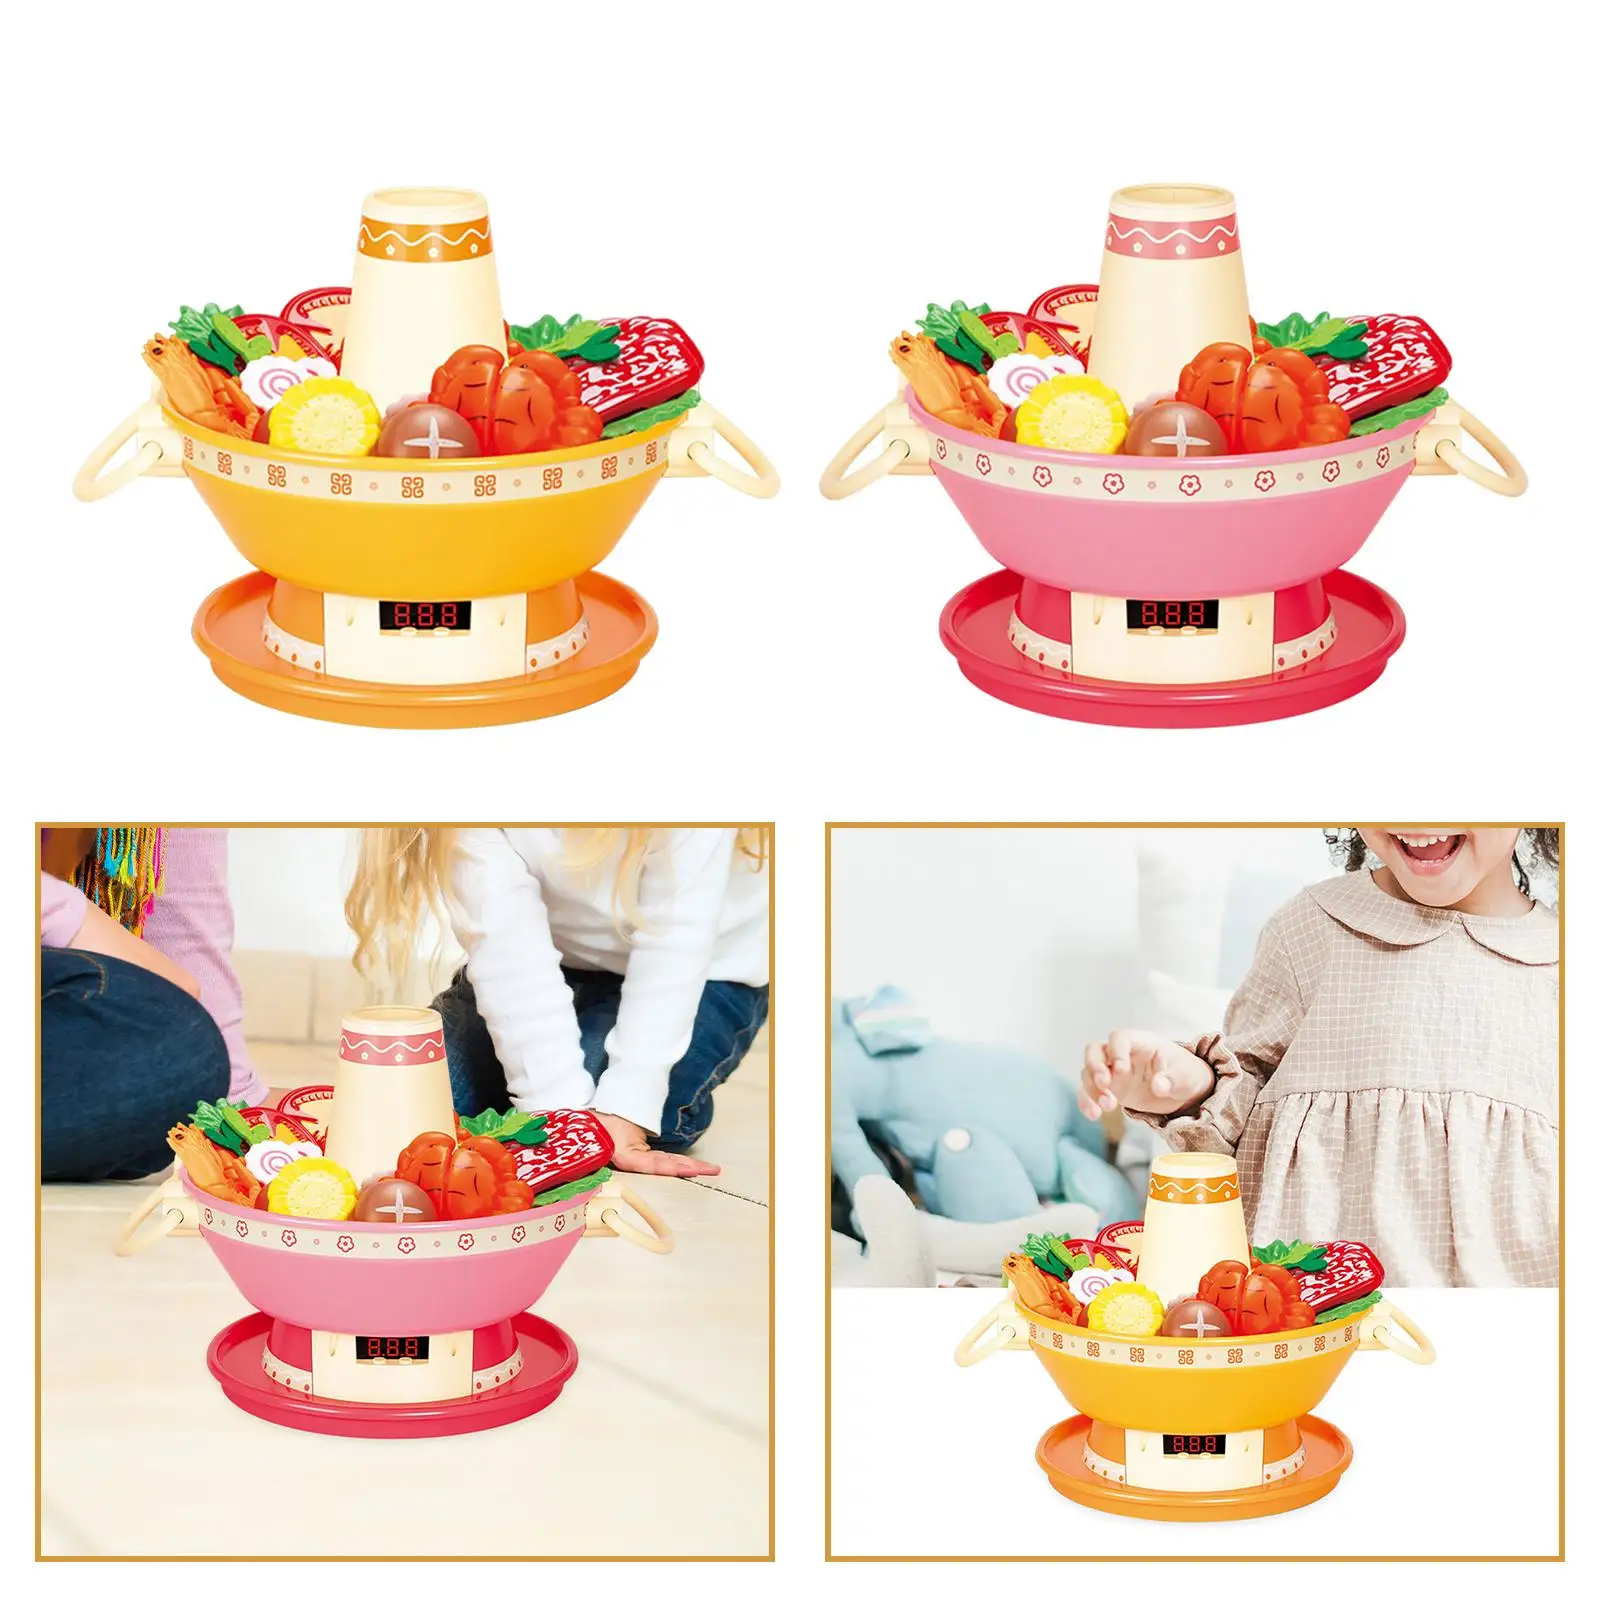 Kitchen Playset Learning Skill Toy with Food Accessories Hot Pot Pretend Play Kitchen Playset Toy for Unisex Children Gifts